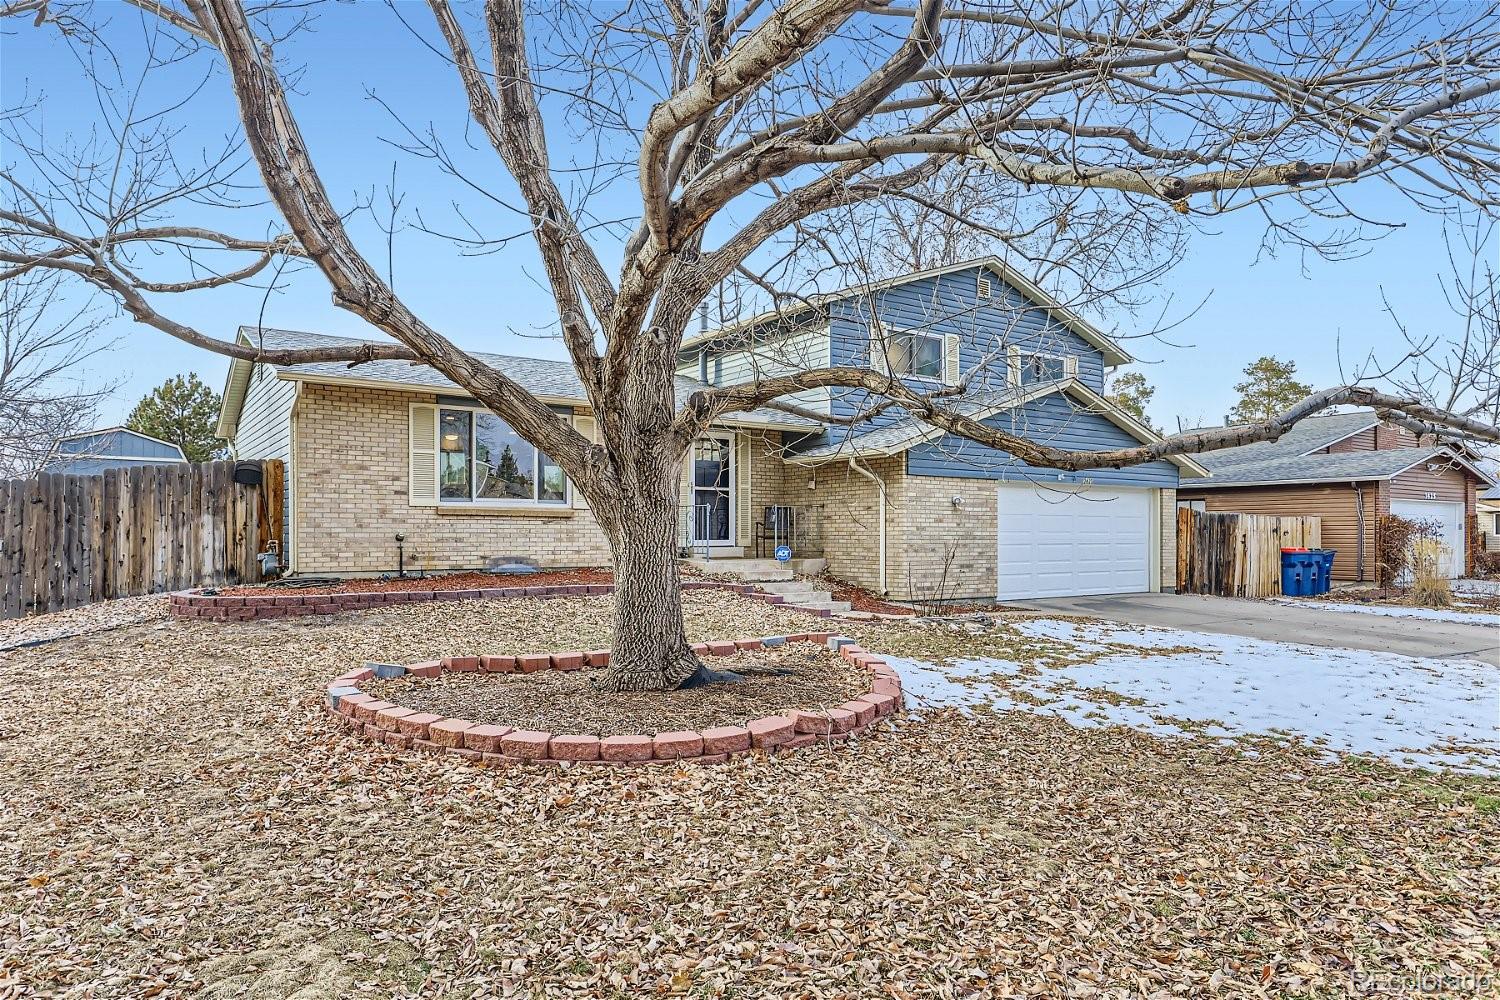 3435 s jasper court, Aurora sold home. Closed on 2024-02-20 for $560,500.